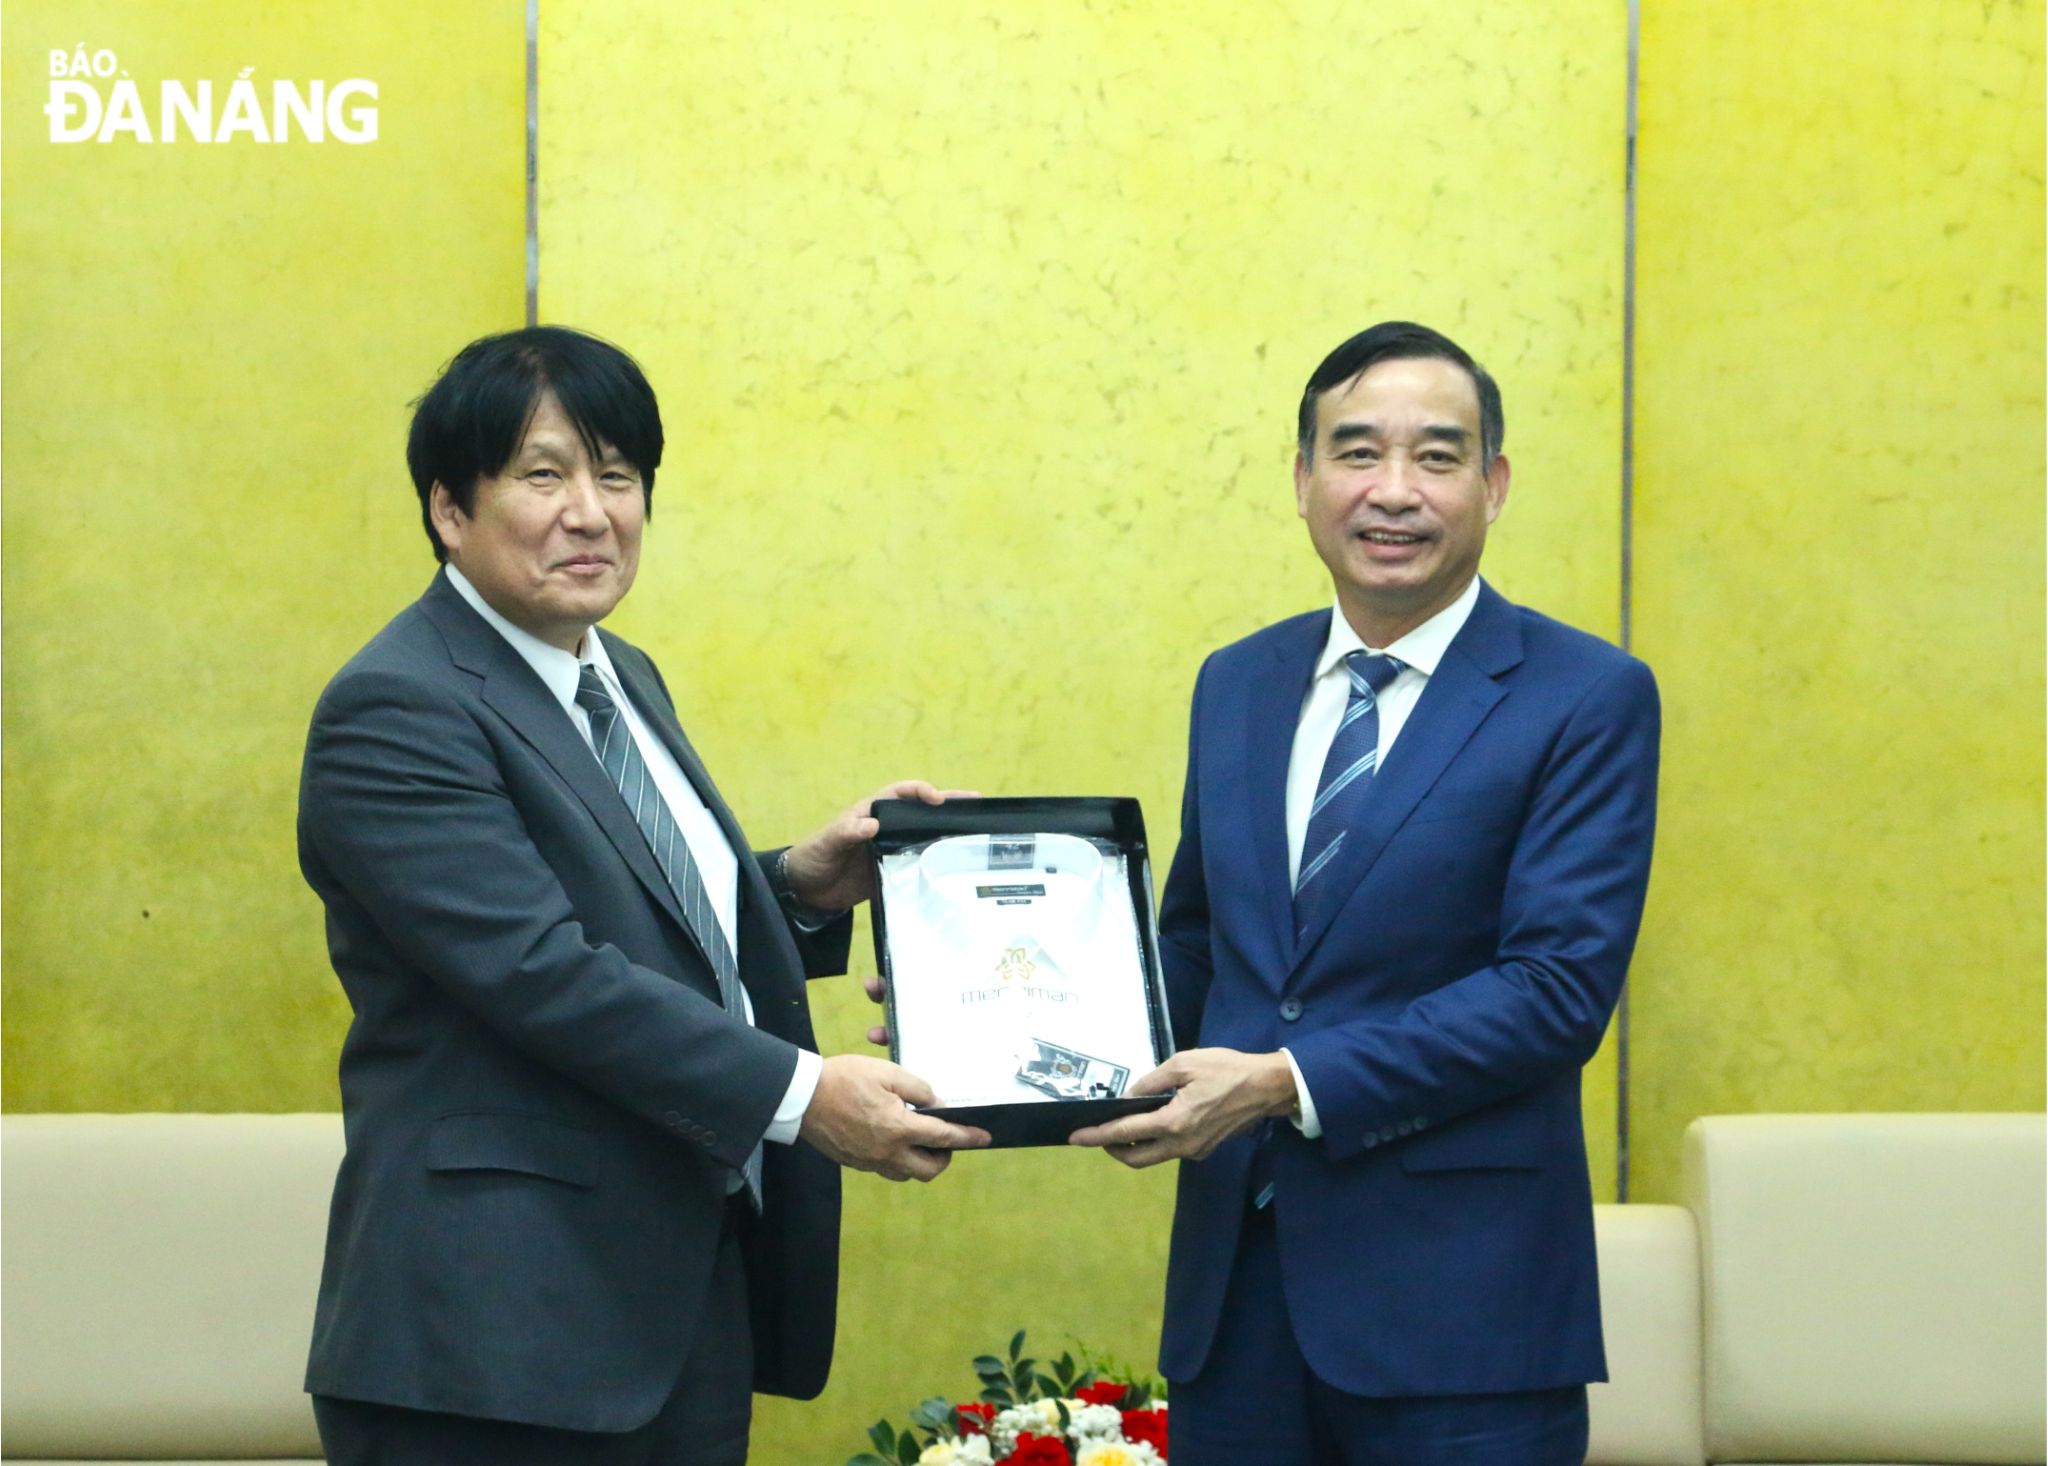 Da Nang People's Committee Chairman Le Trung Chinh (right) presenting a gift to Consul General Yakabe Yoshinori who came to say goodbye at the end of his tenure in the city. Photo: T.PHUONG